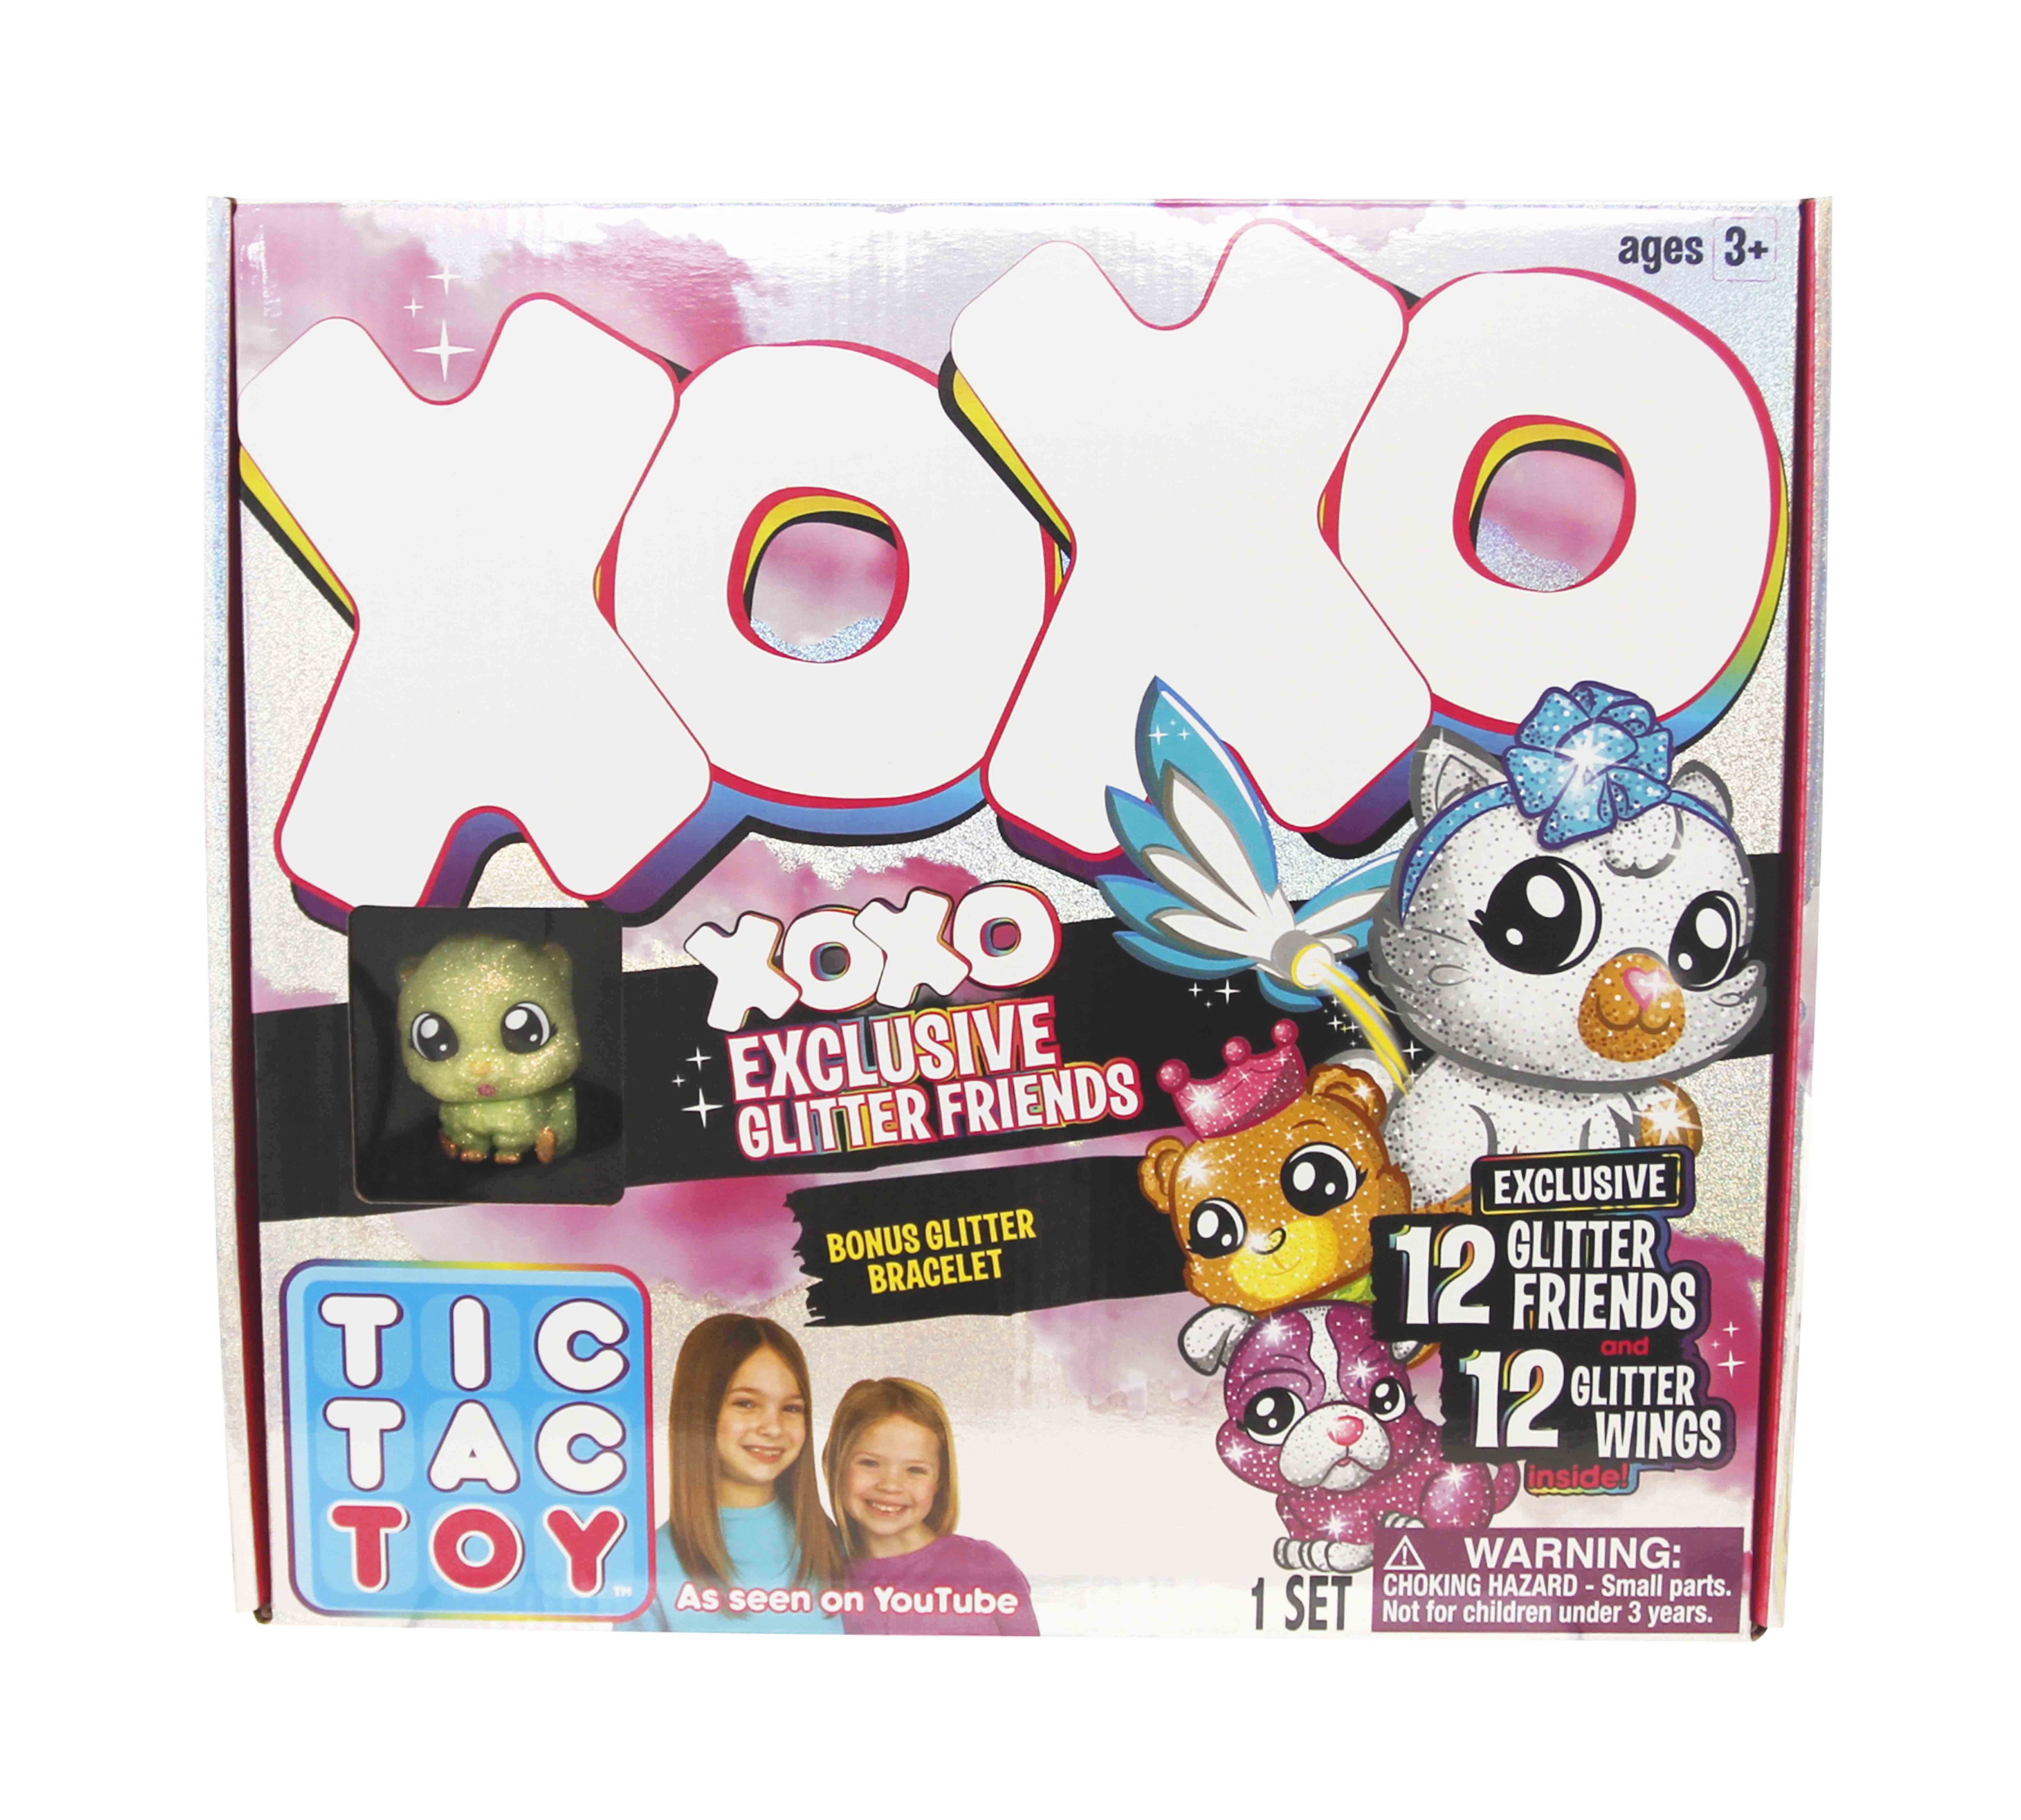 Tic Tac Toy XOXO Exclusive Glitter Friends - image 1 of 5